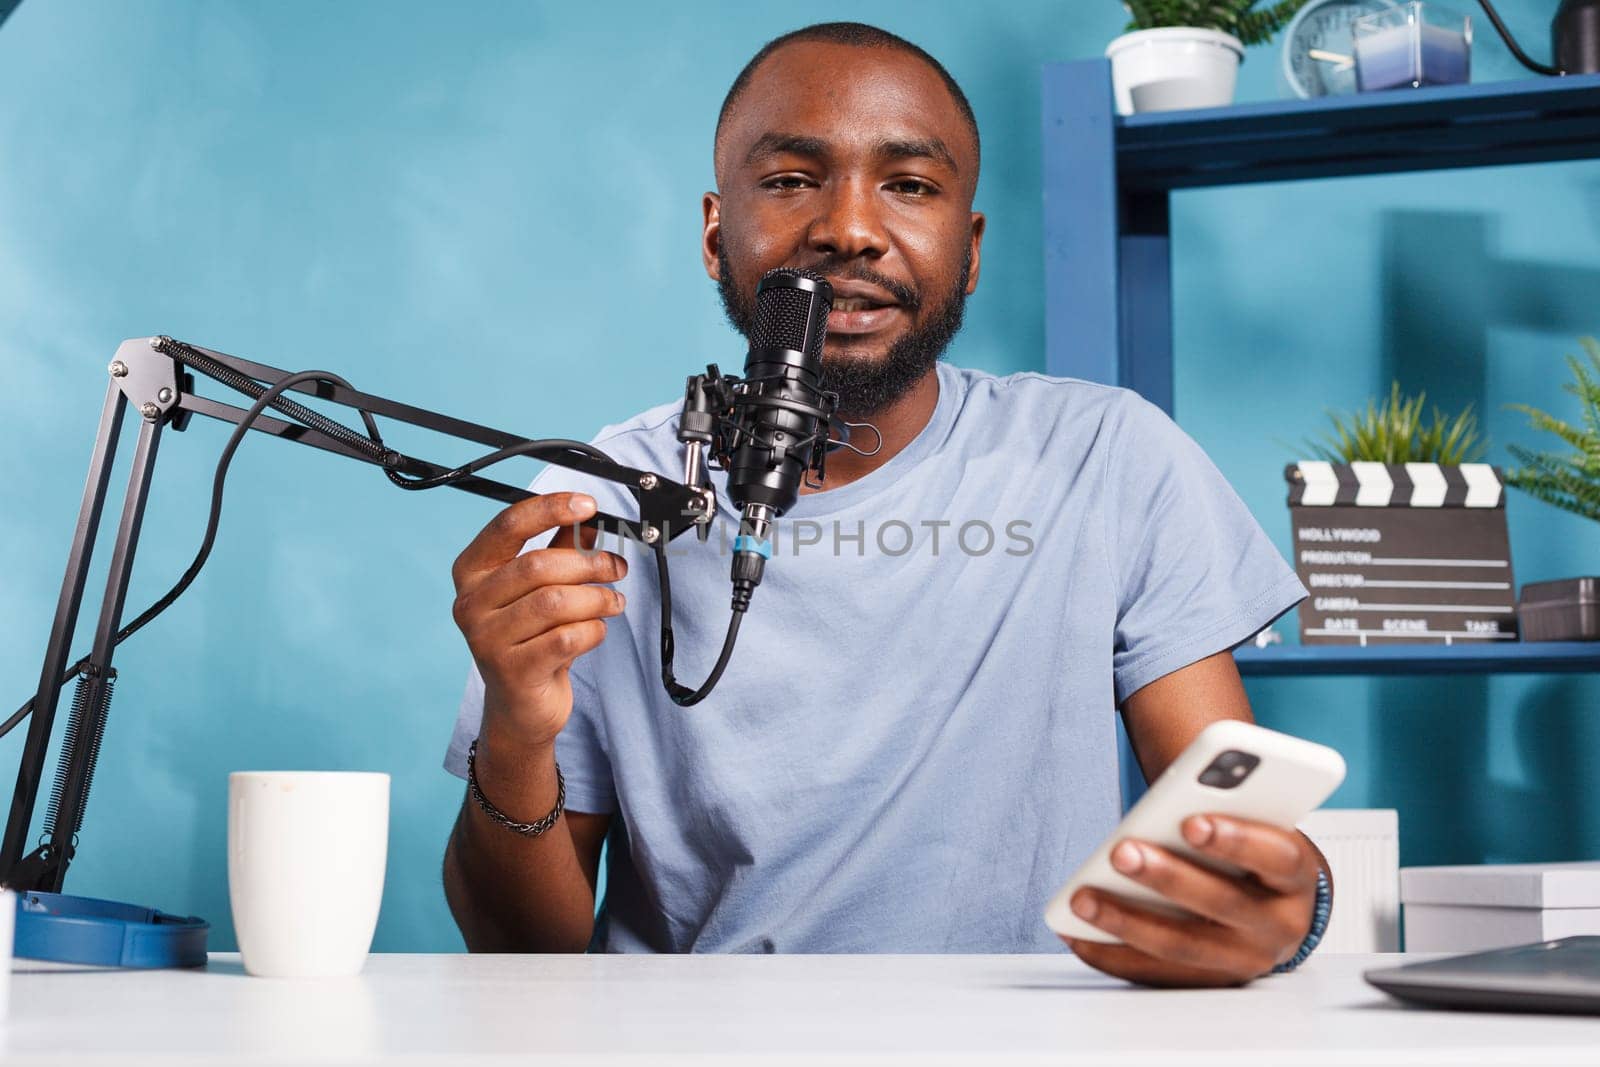 Vlogger creating podcast content while reading news from smartphone and looking at camera. African american man holding mobile phone and answering question while streaming live